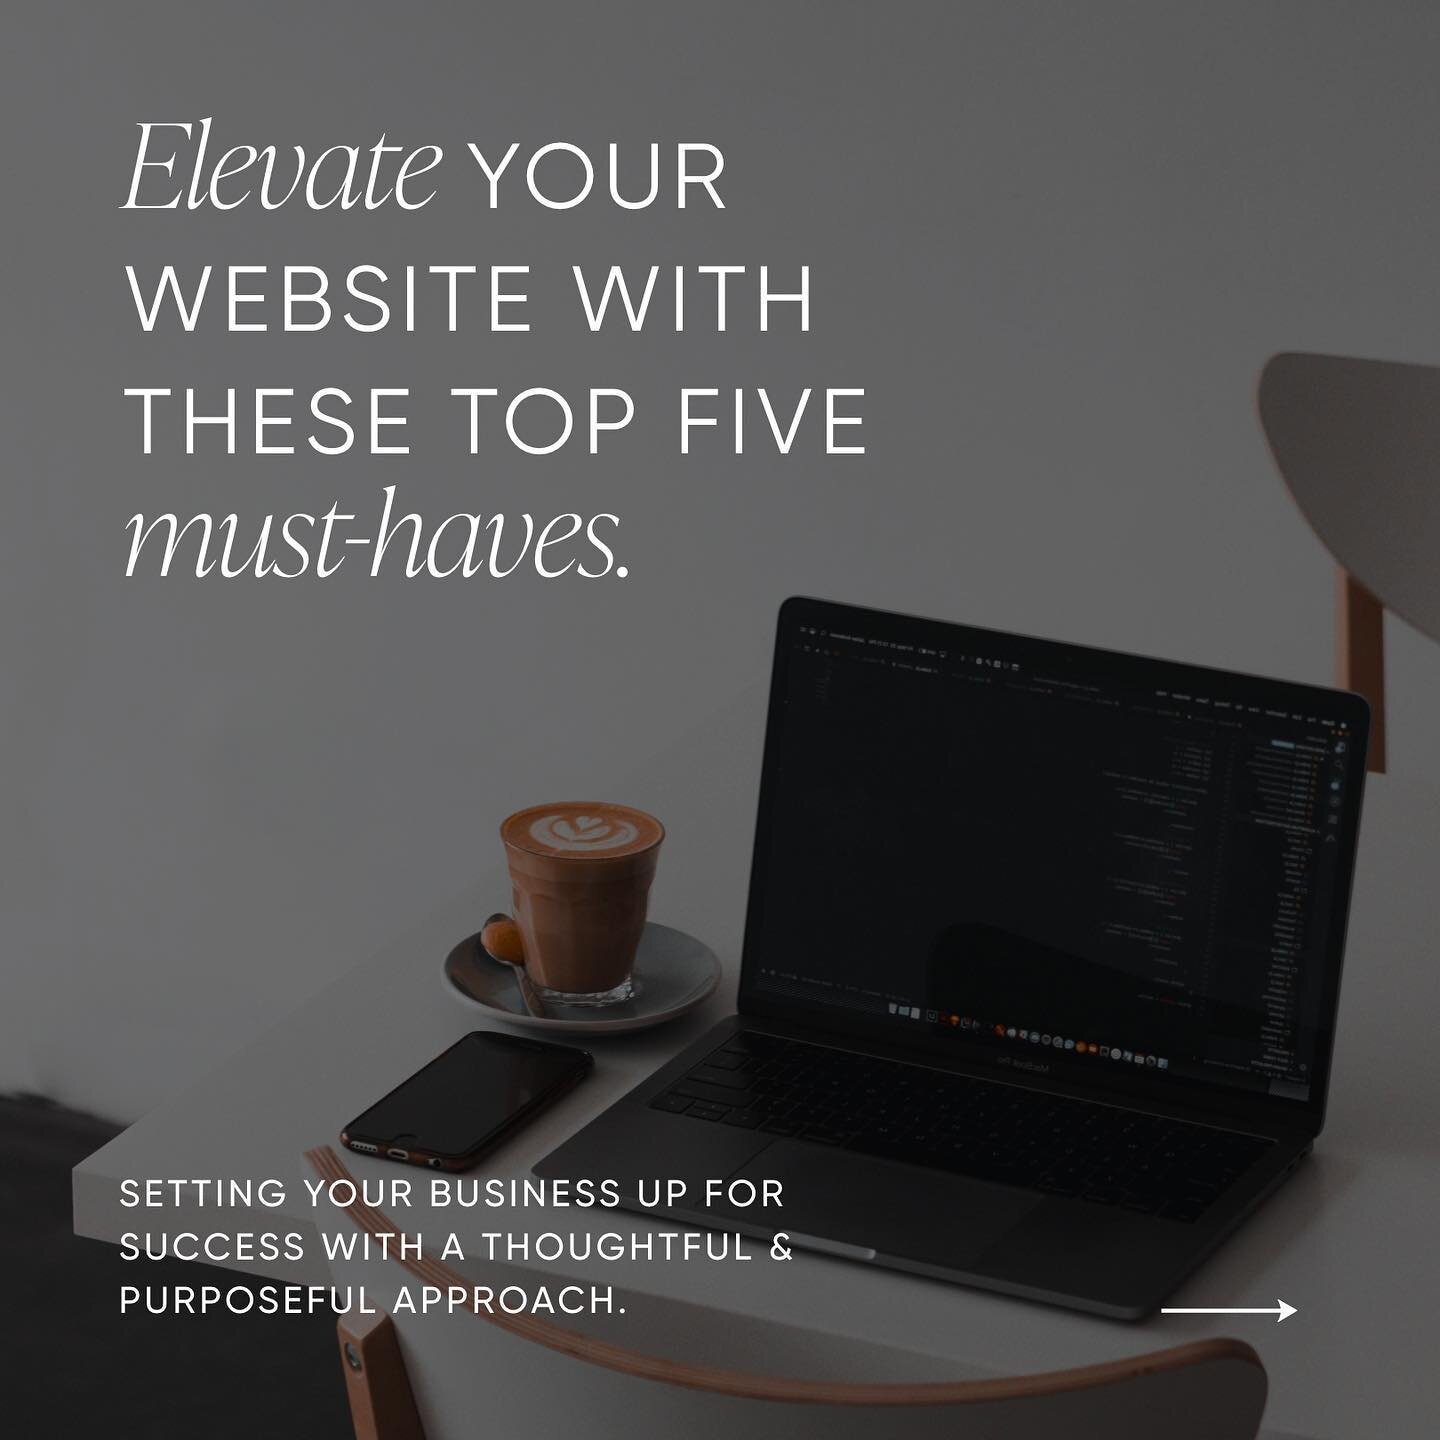 When it comes to websites, there are some non-negotiables that you really can&rsquo;t ignore. 

Whether you&rsquo;re creating a new website for your business or updating what you&rsquo;ve got, here are some website &lsquo;must have&rsquo; checks that